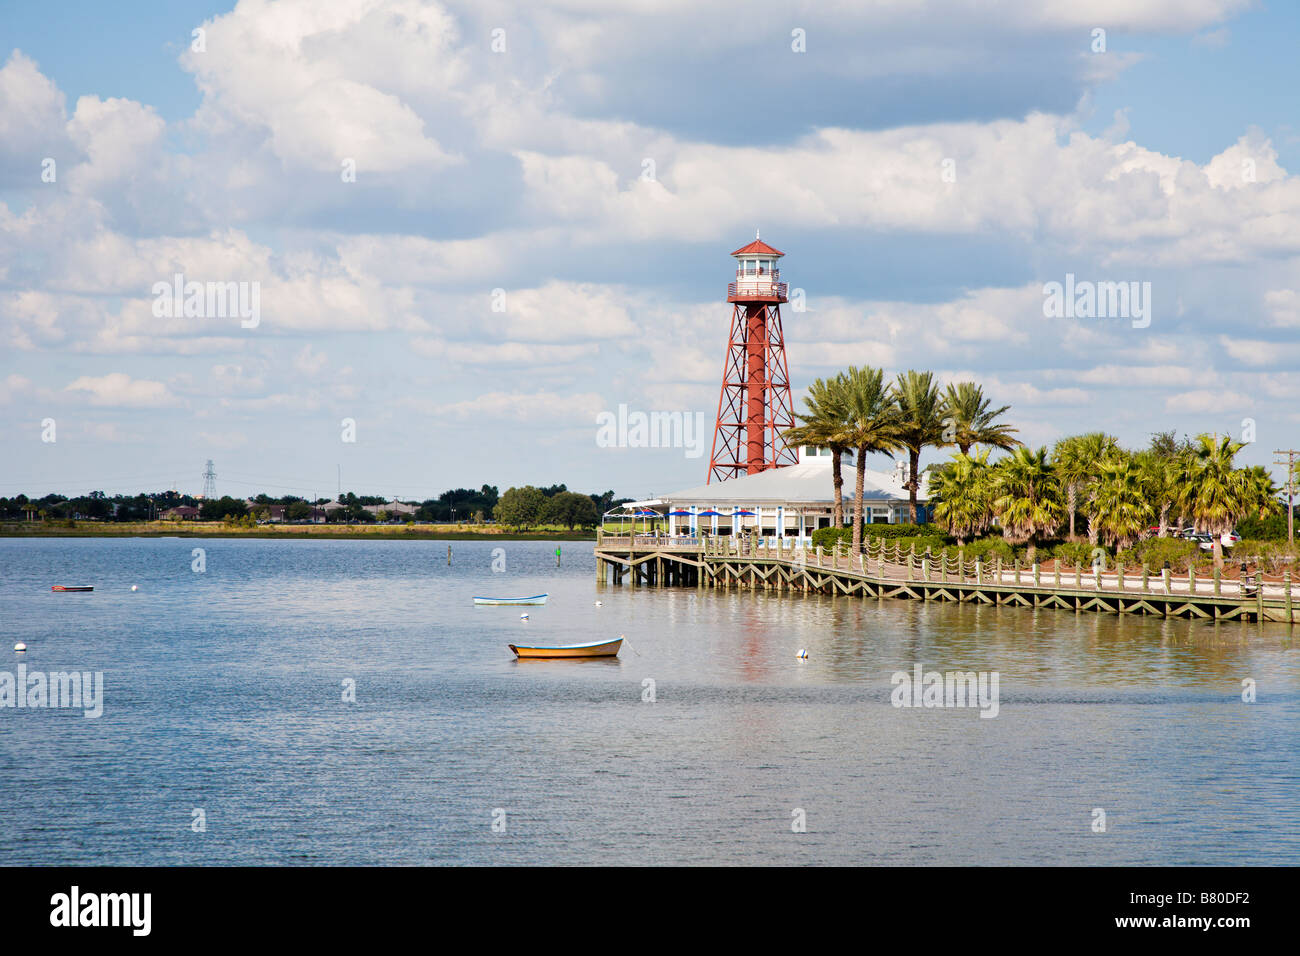 Replica of lighthouse next to seafood restaurant in The Villages retirement community in Central Florida, USA Stock Photo